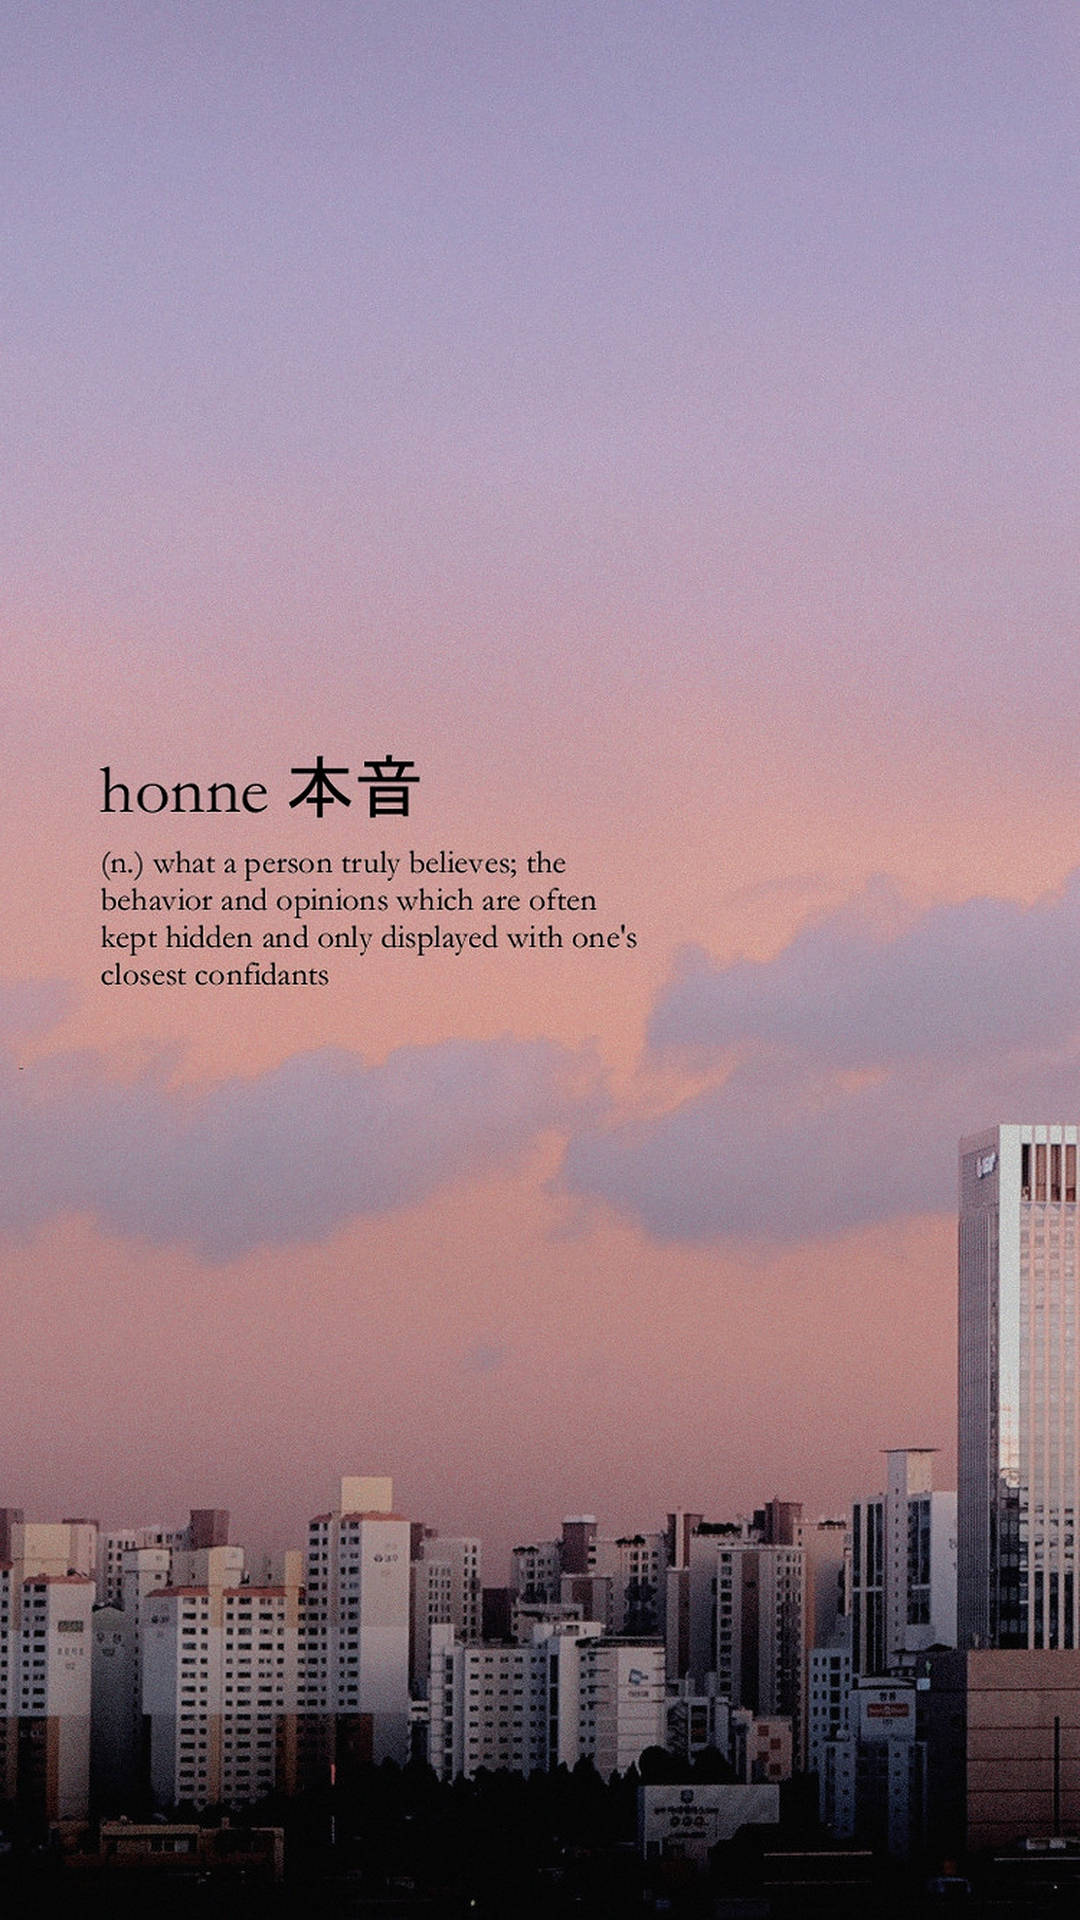 Honne Aesthetic Words Picture